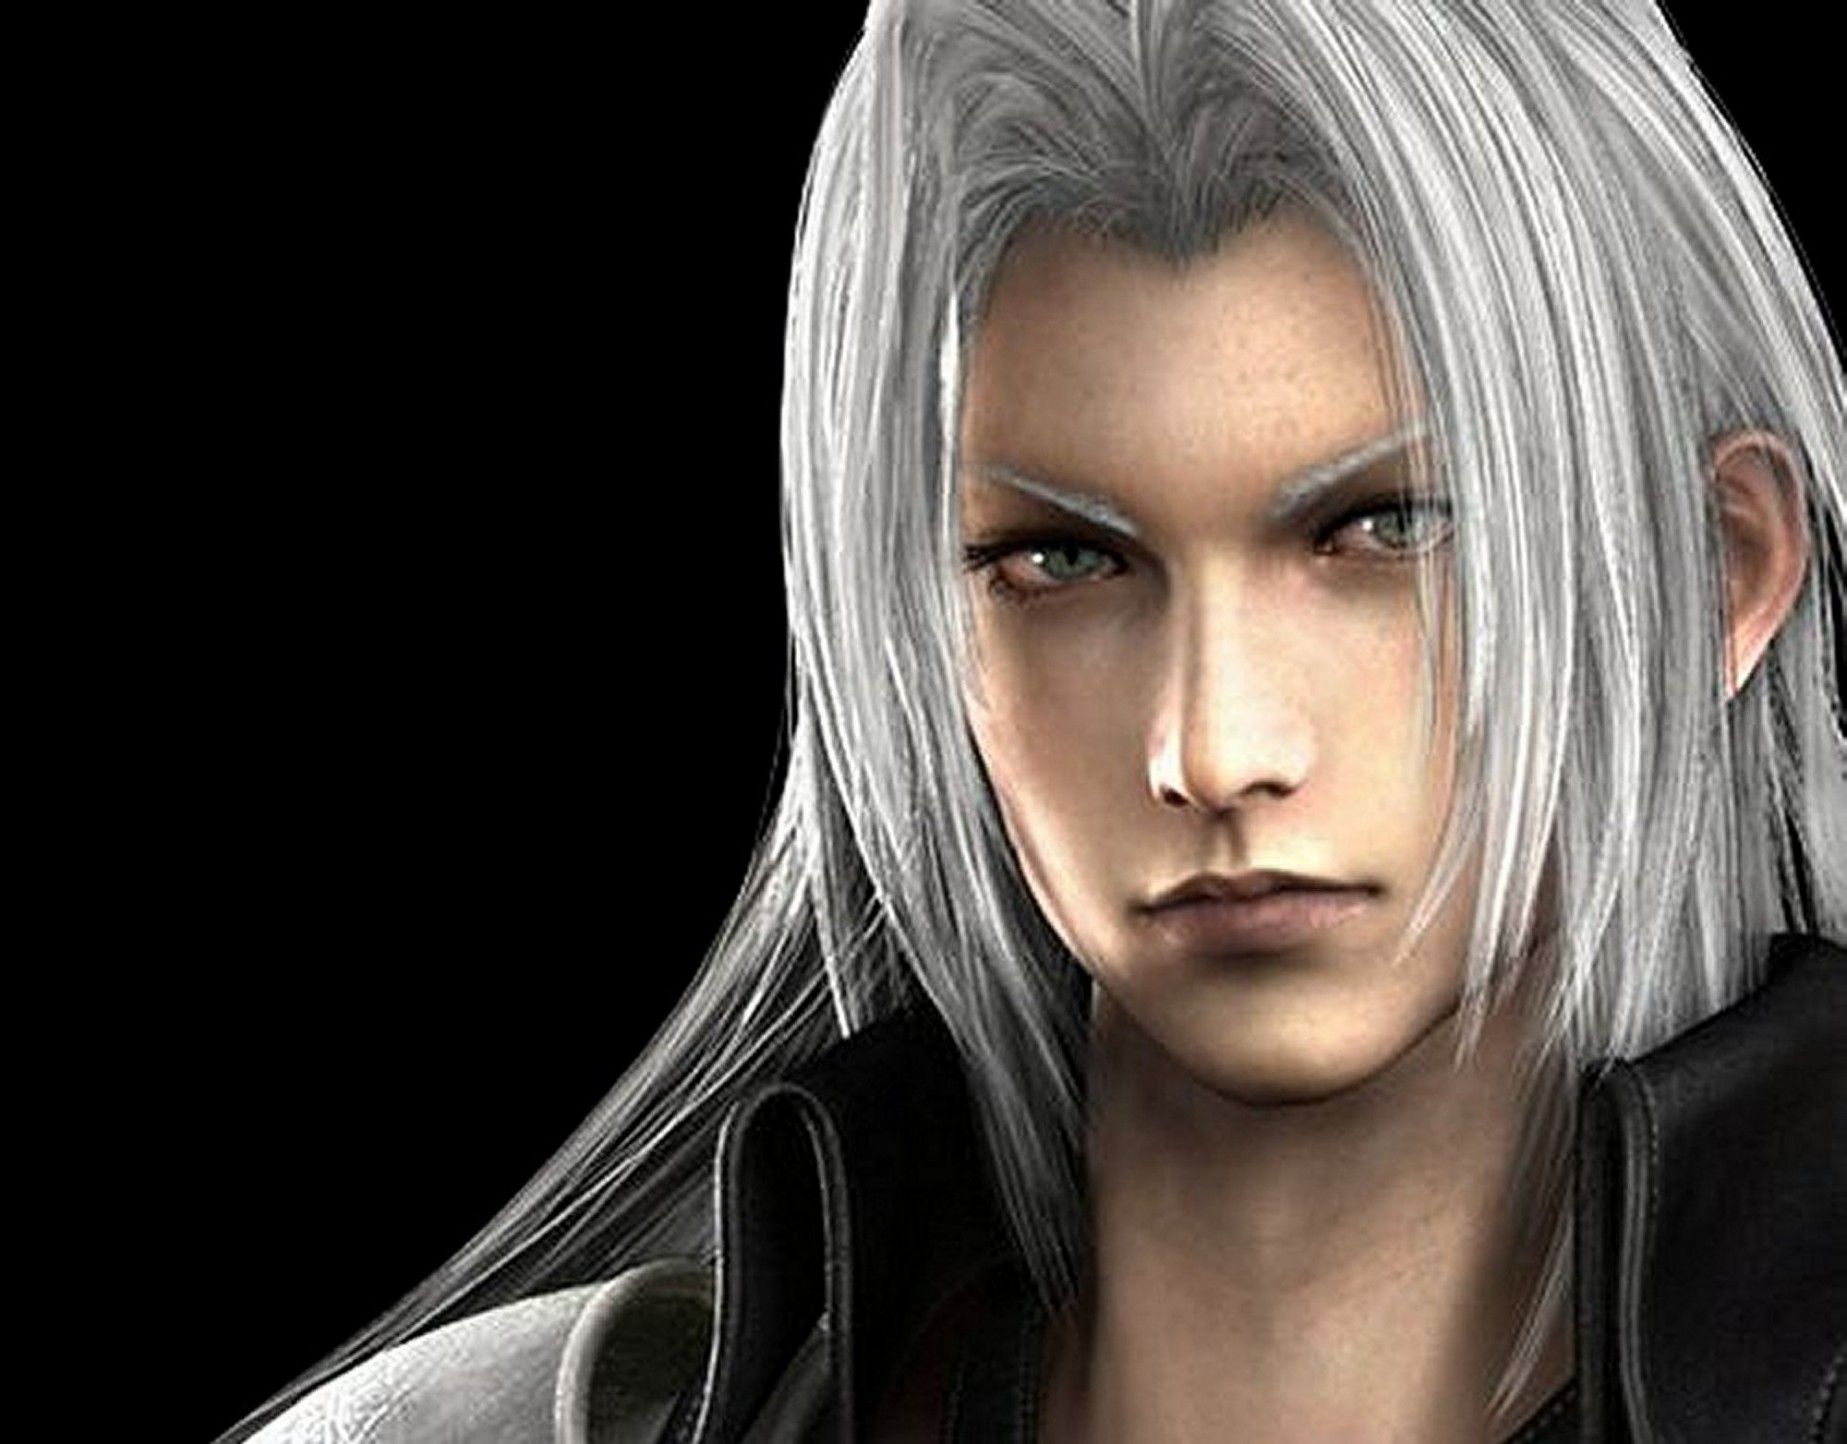 The Final Fantasy Character Sephiroth Was My Model For